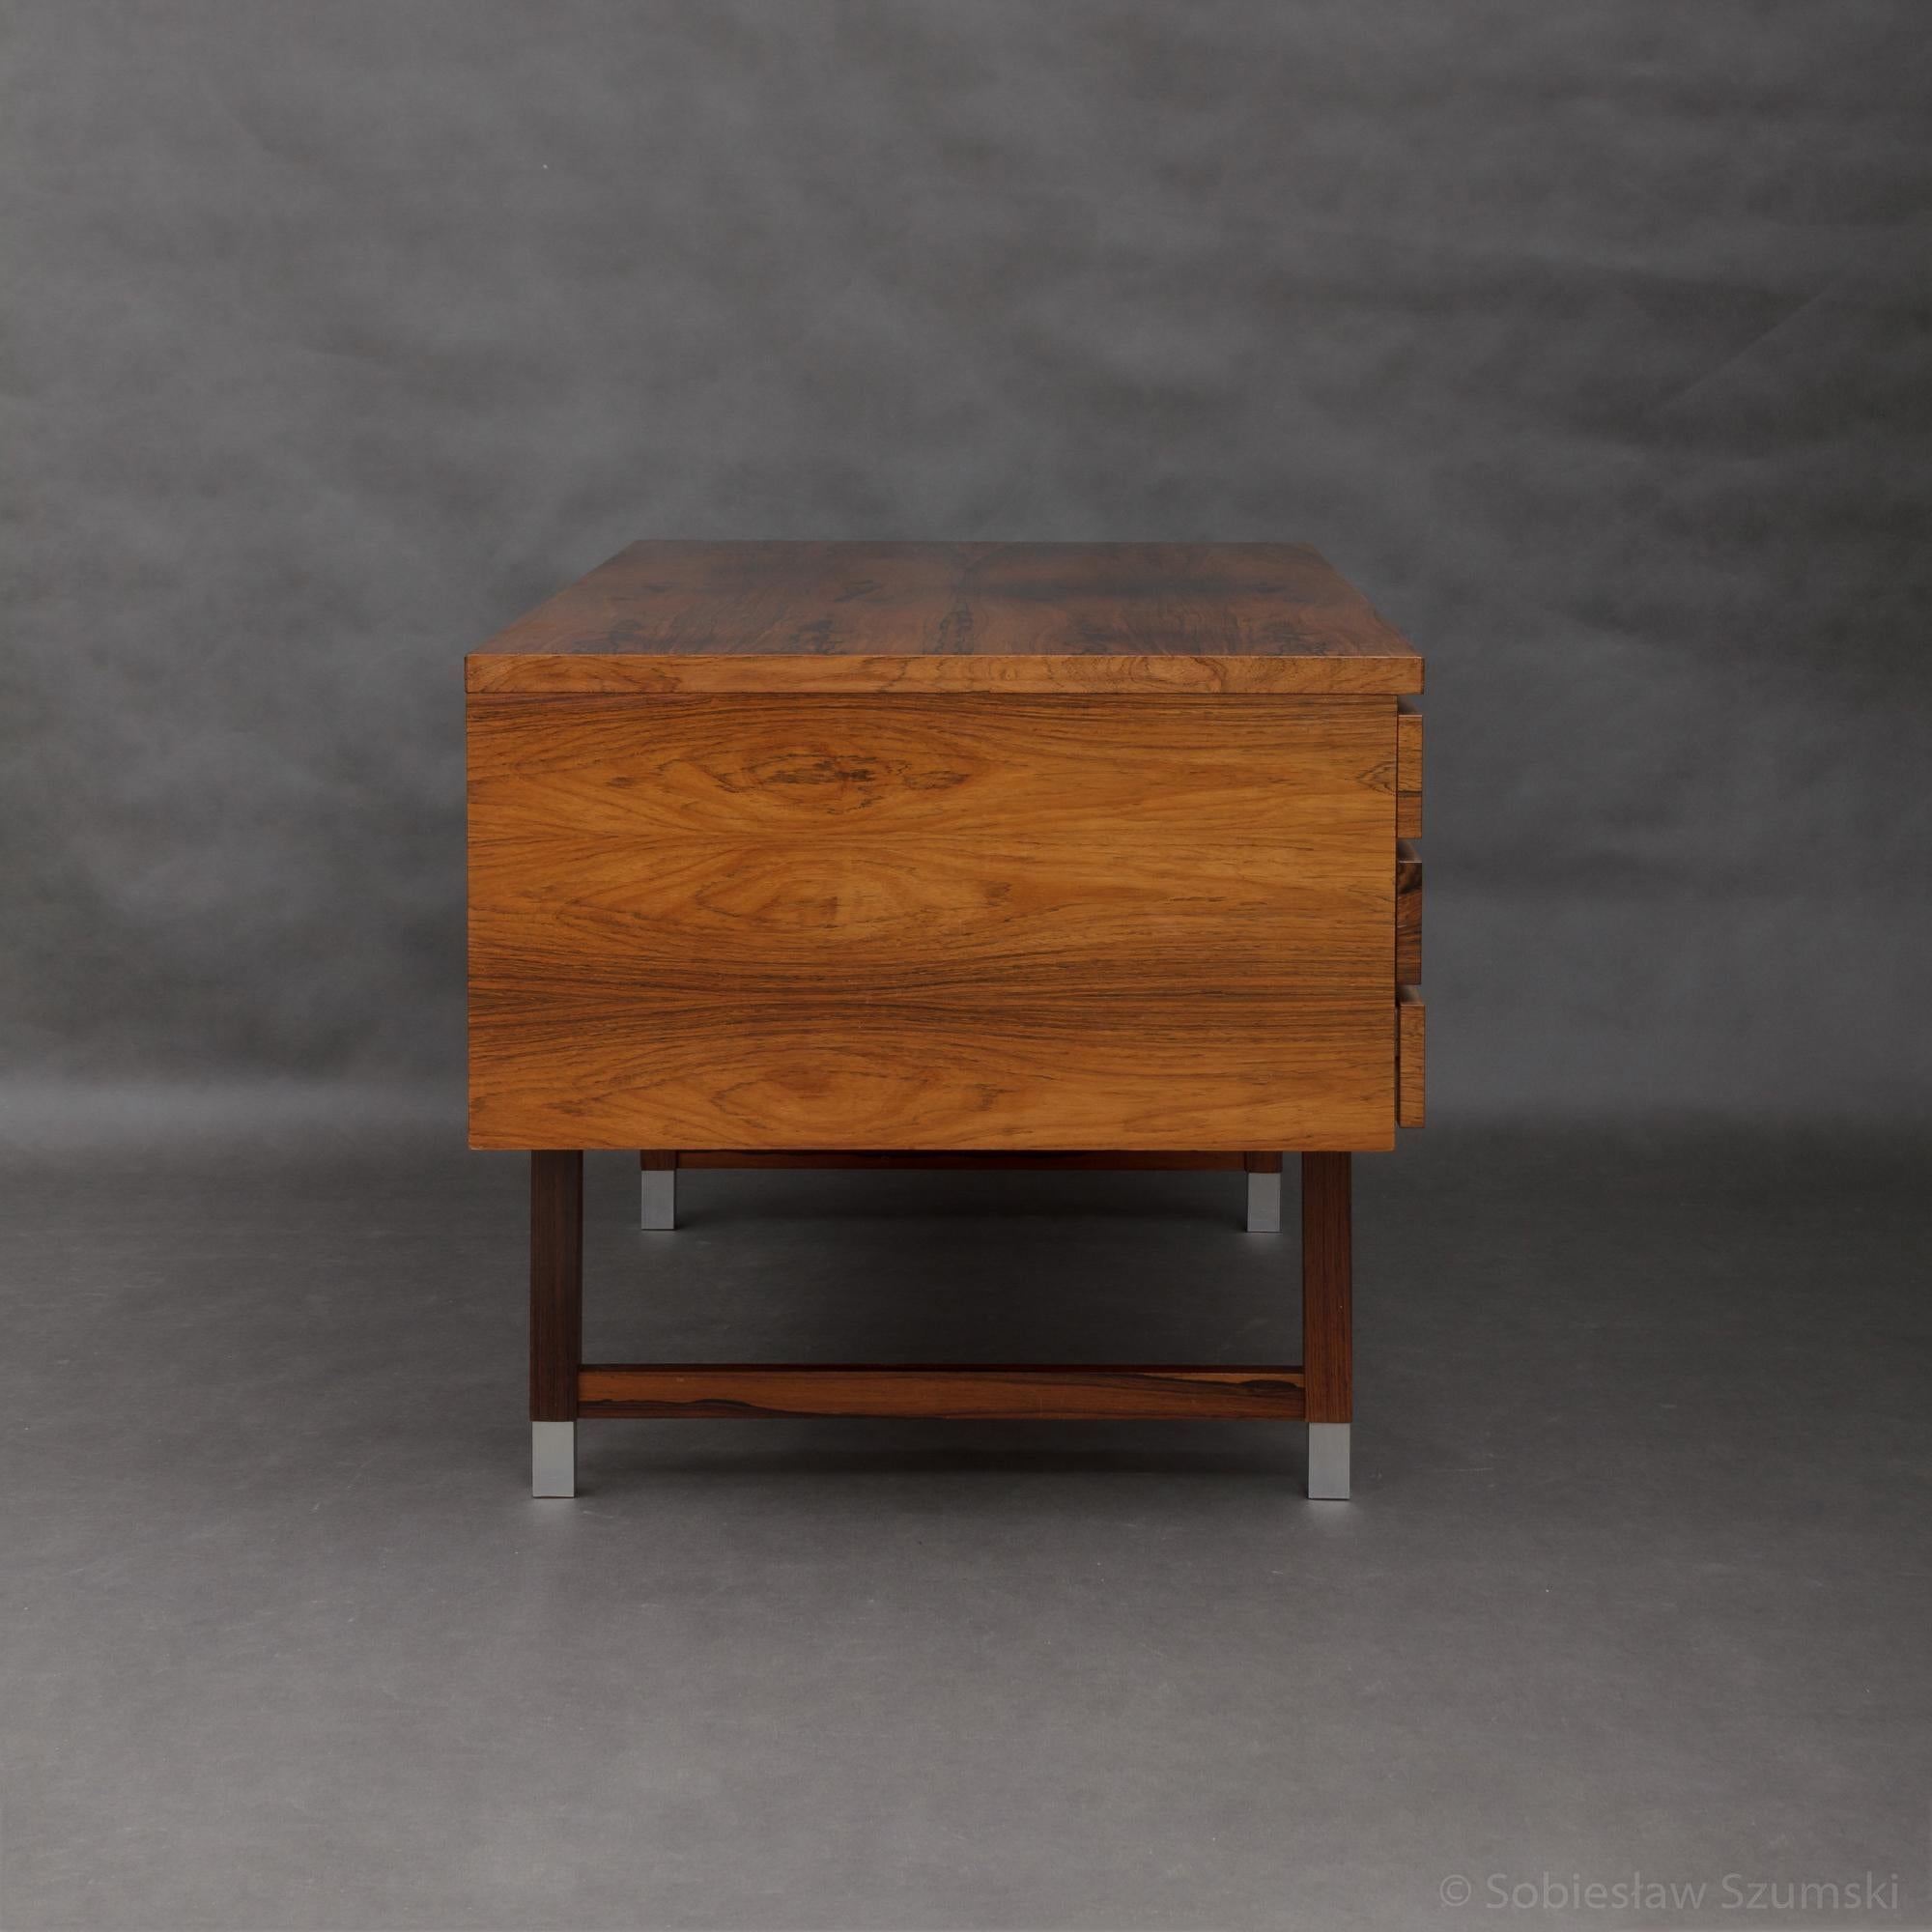 Freestanding desk designed by Kai Kristiansen in the 1960s and manufactured by Feldballes Møbelfabrik. It features six deep drawers in the front and shelves on the back of the piece. The entire piece is in rich grain rosewood with aluminium handles